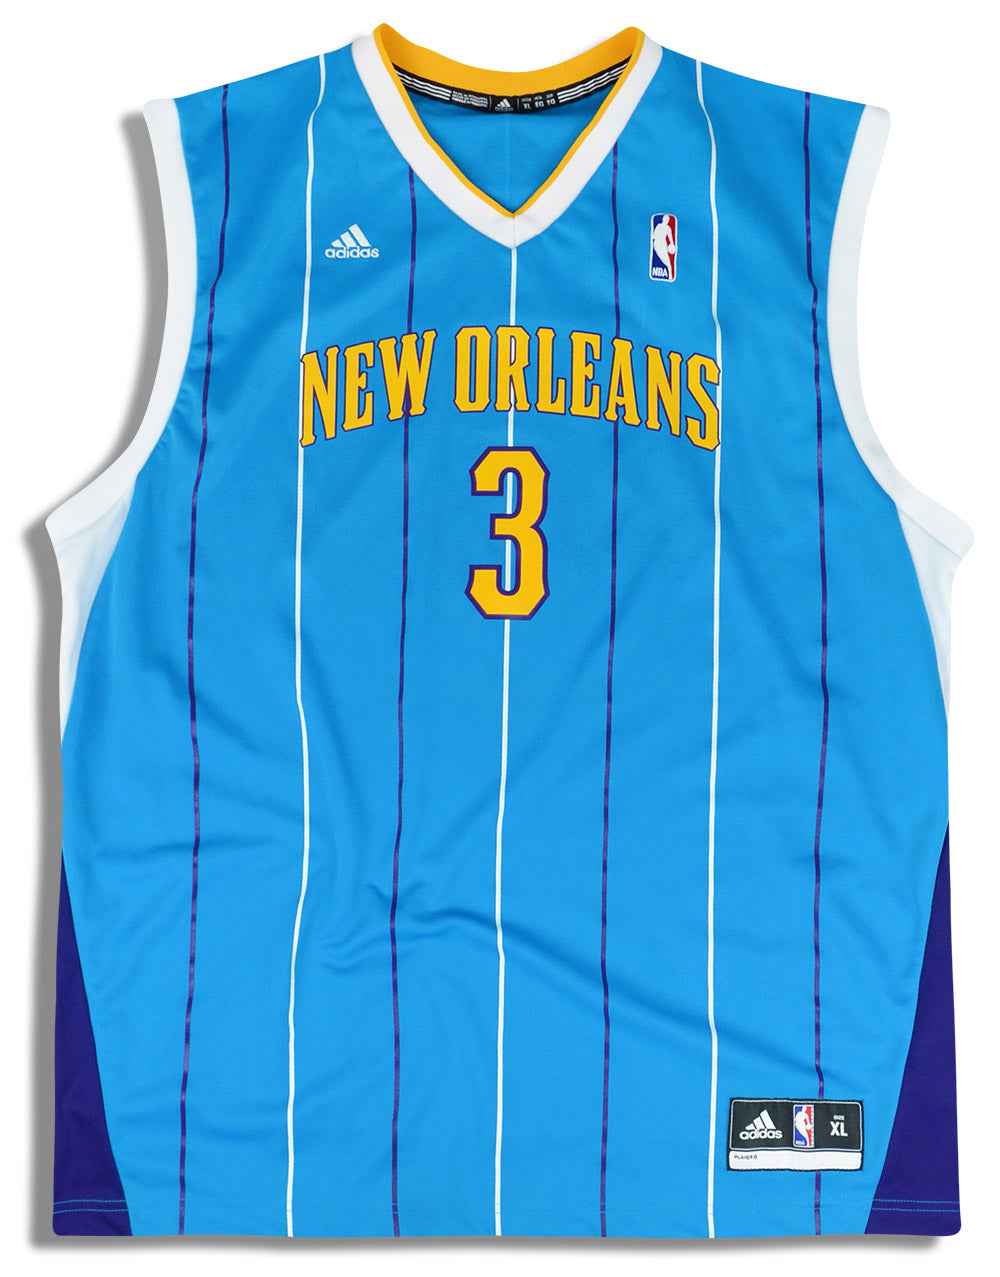 New Orleans Pelicans Jerseys, Pelicans Jersey, New Orleans